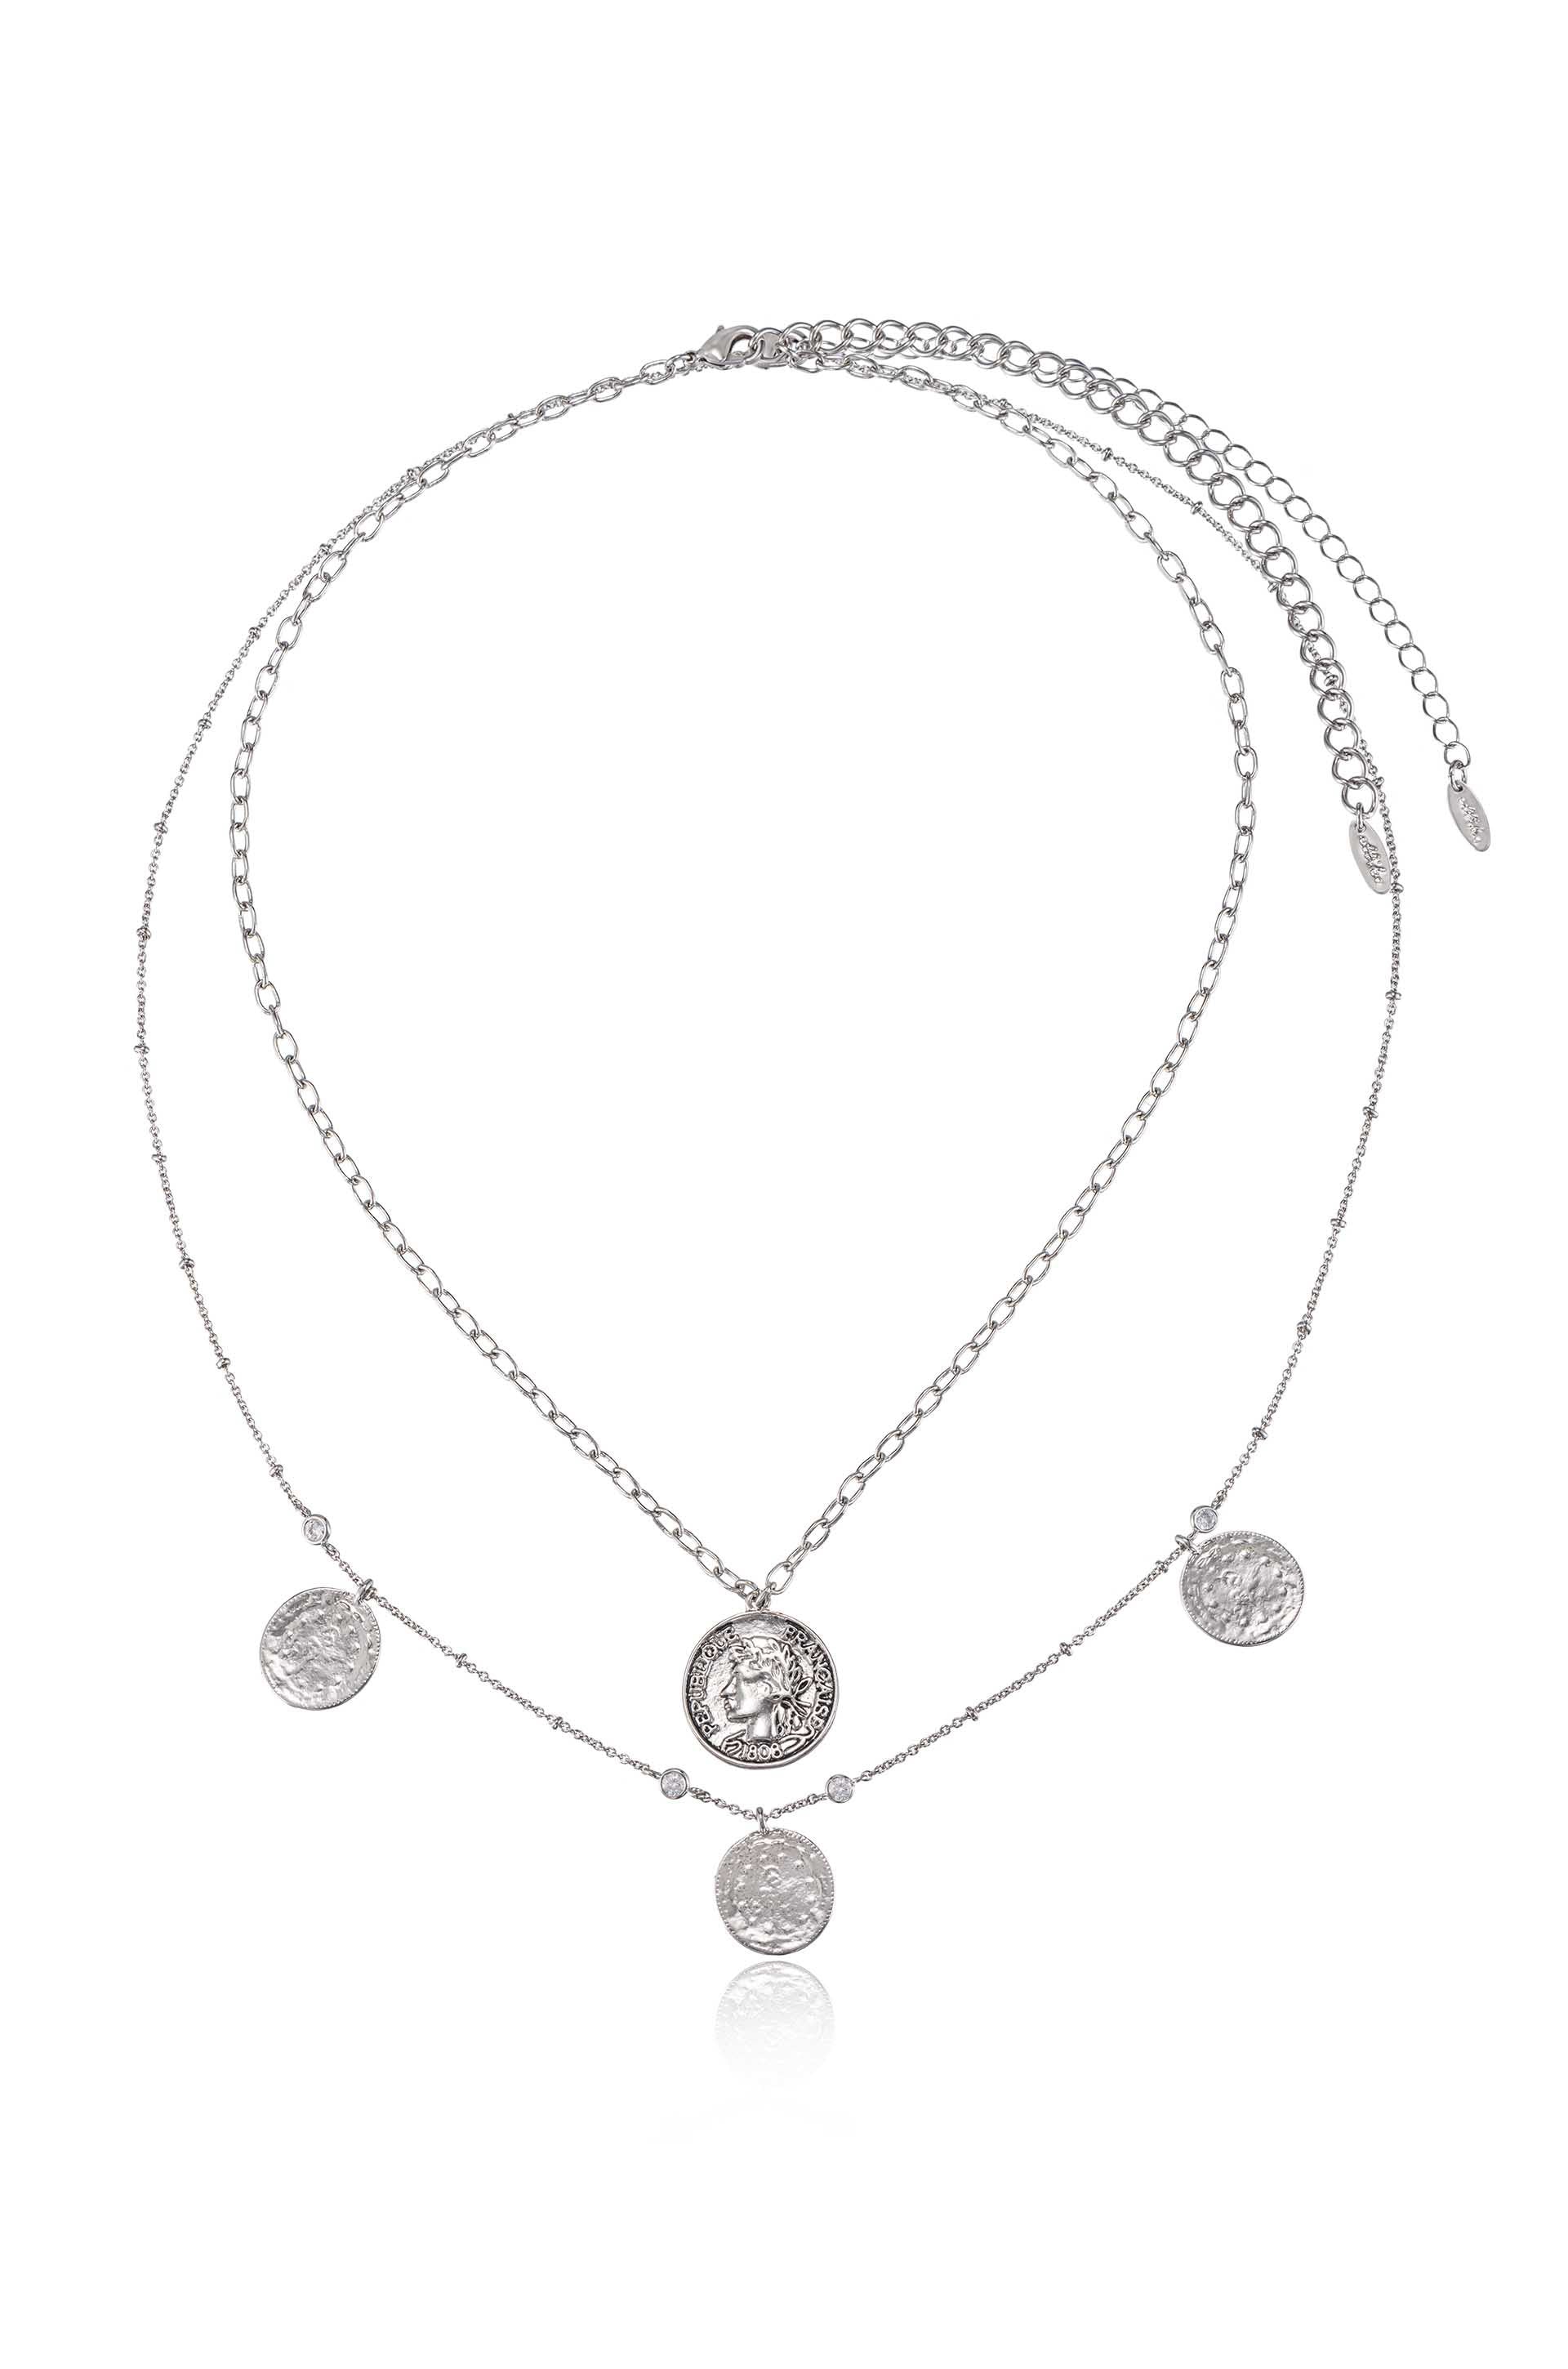 Elite Coin and Crystal Layered Necklace Set in rhodium full